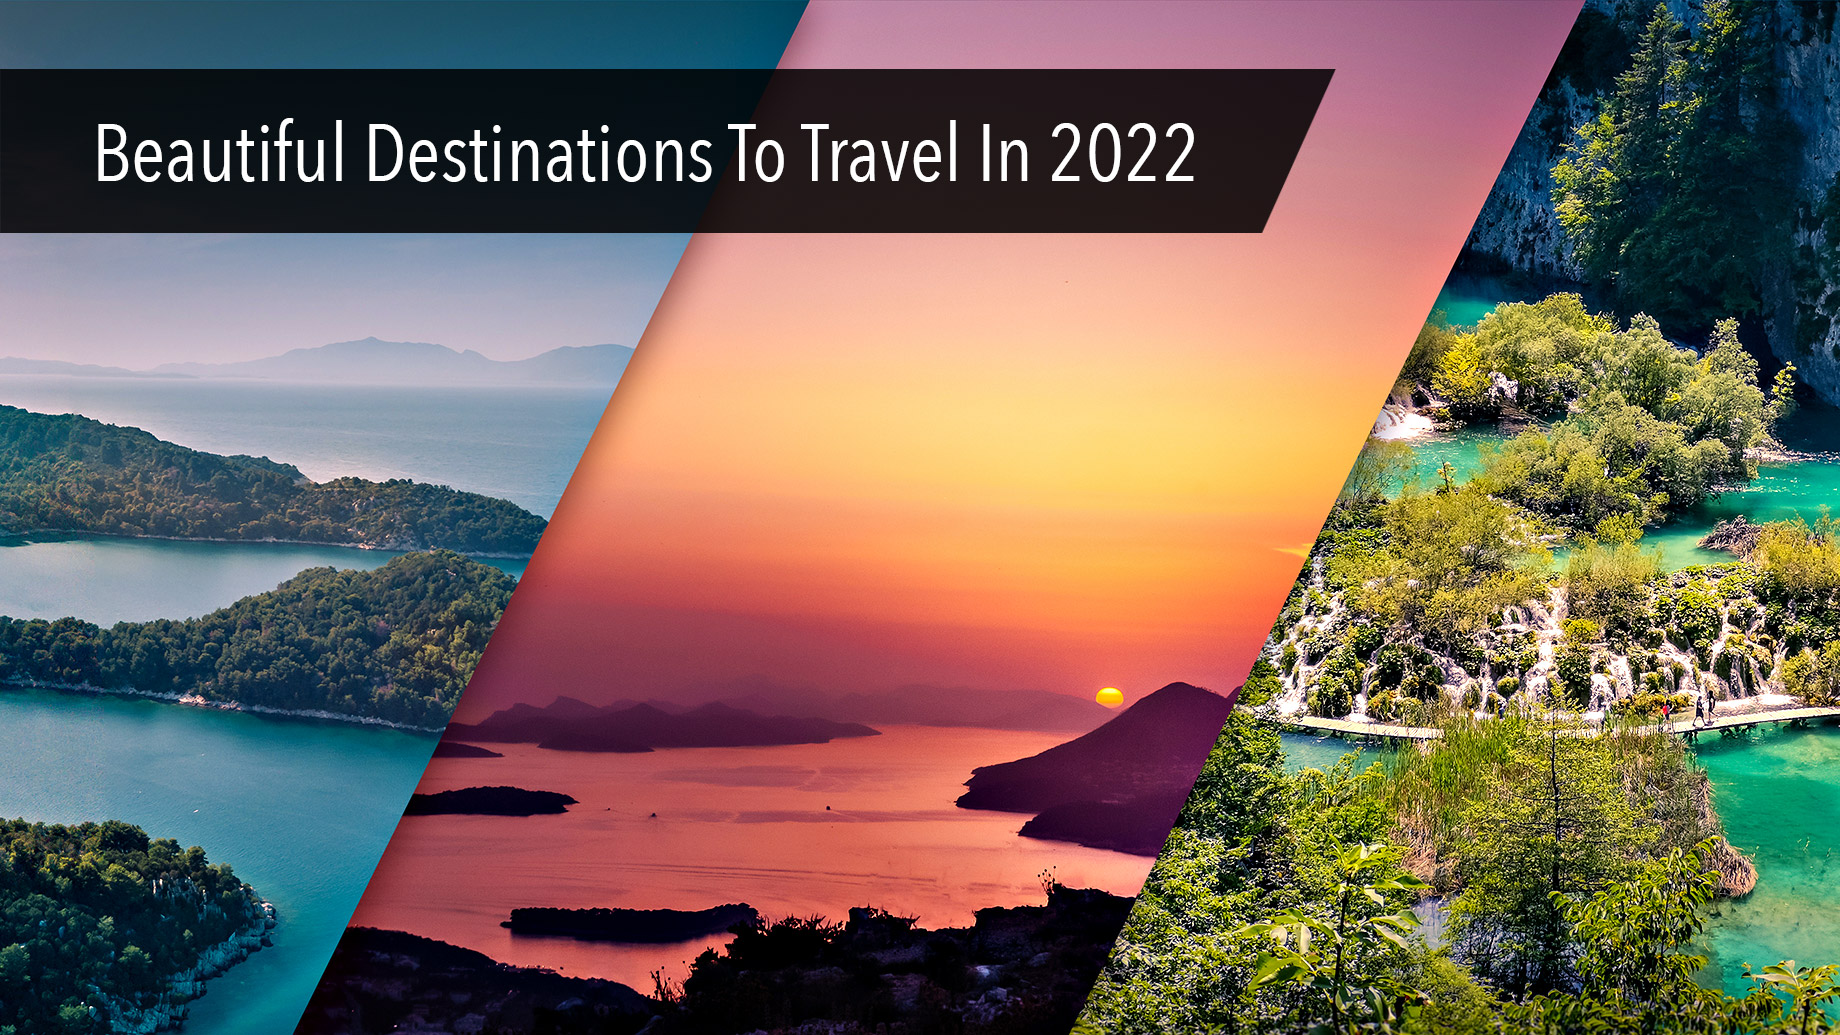 5 Beautiful Destinations To Travel In 2022